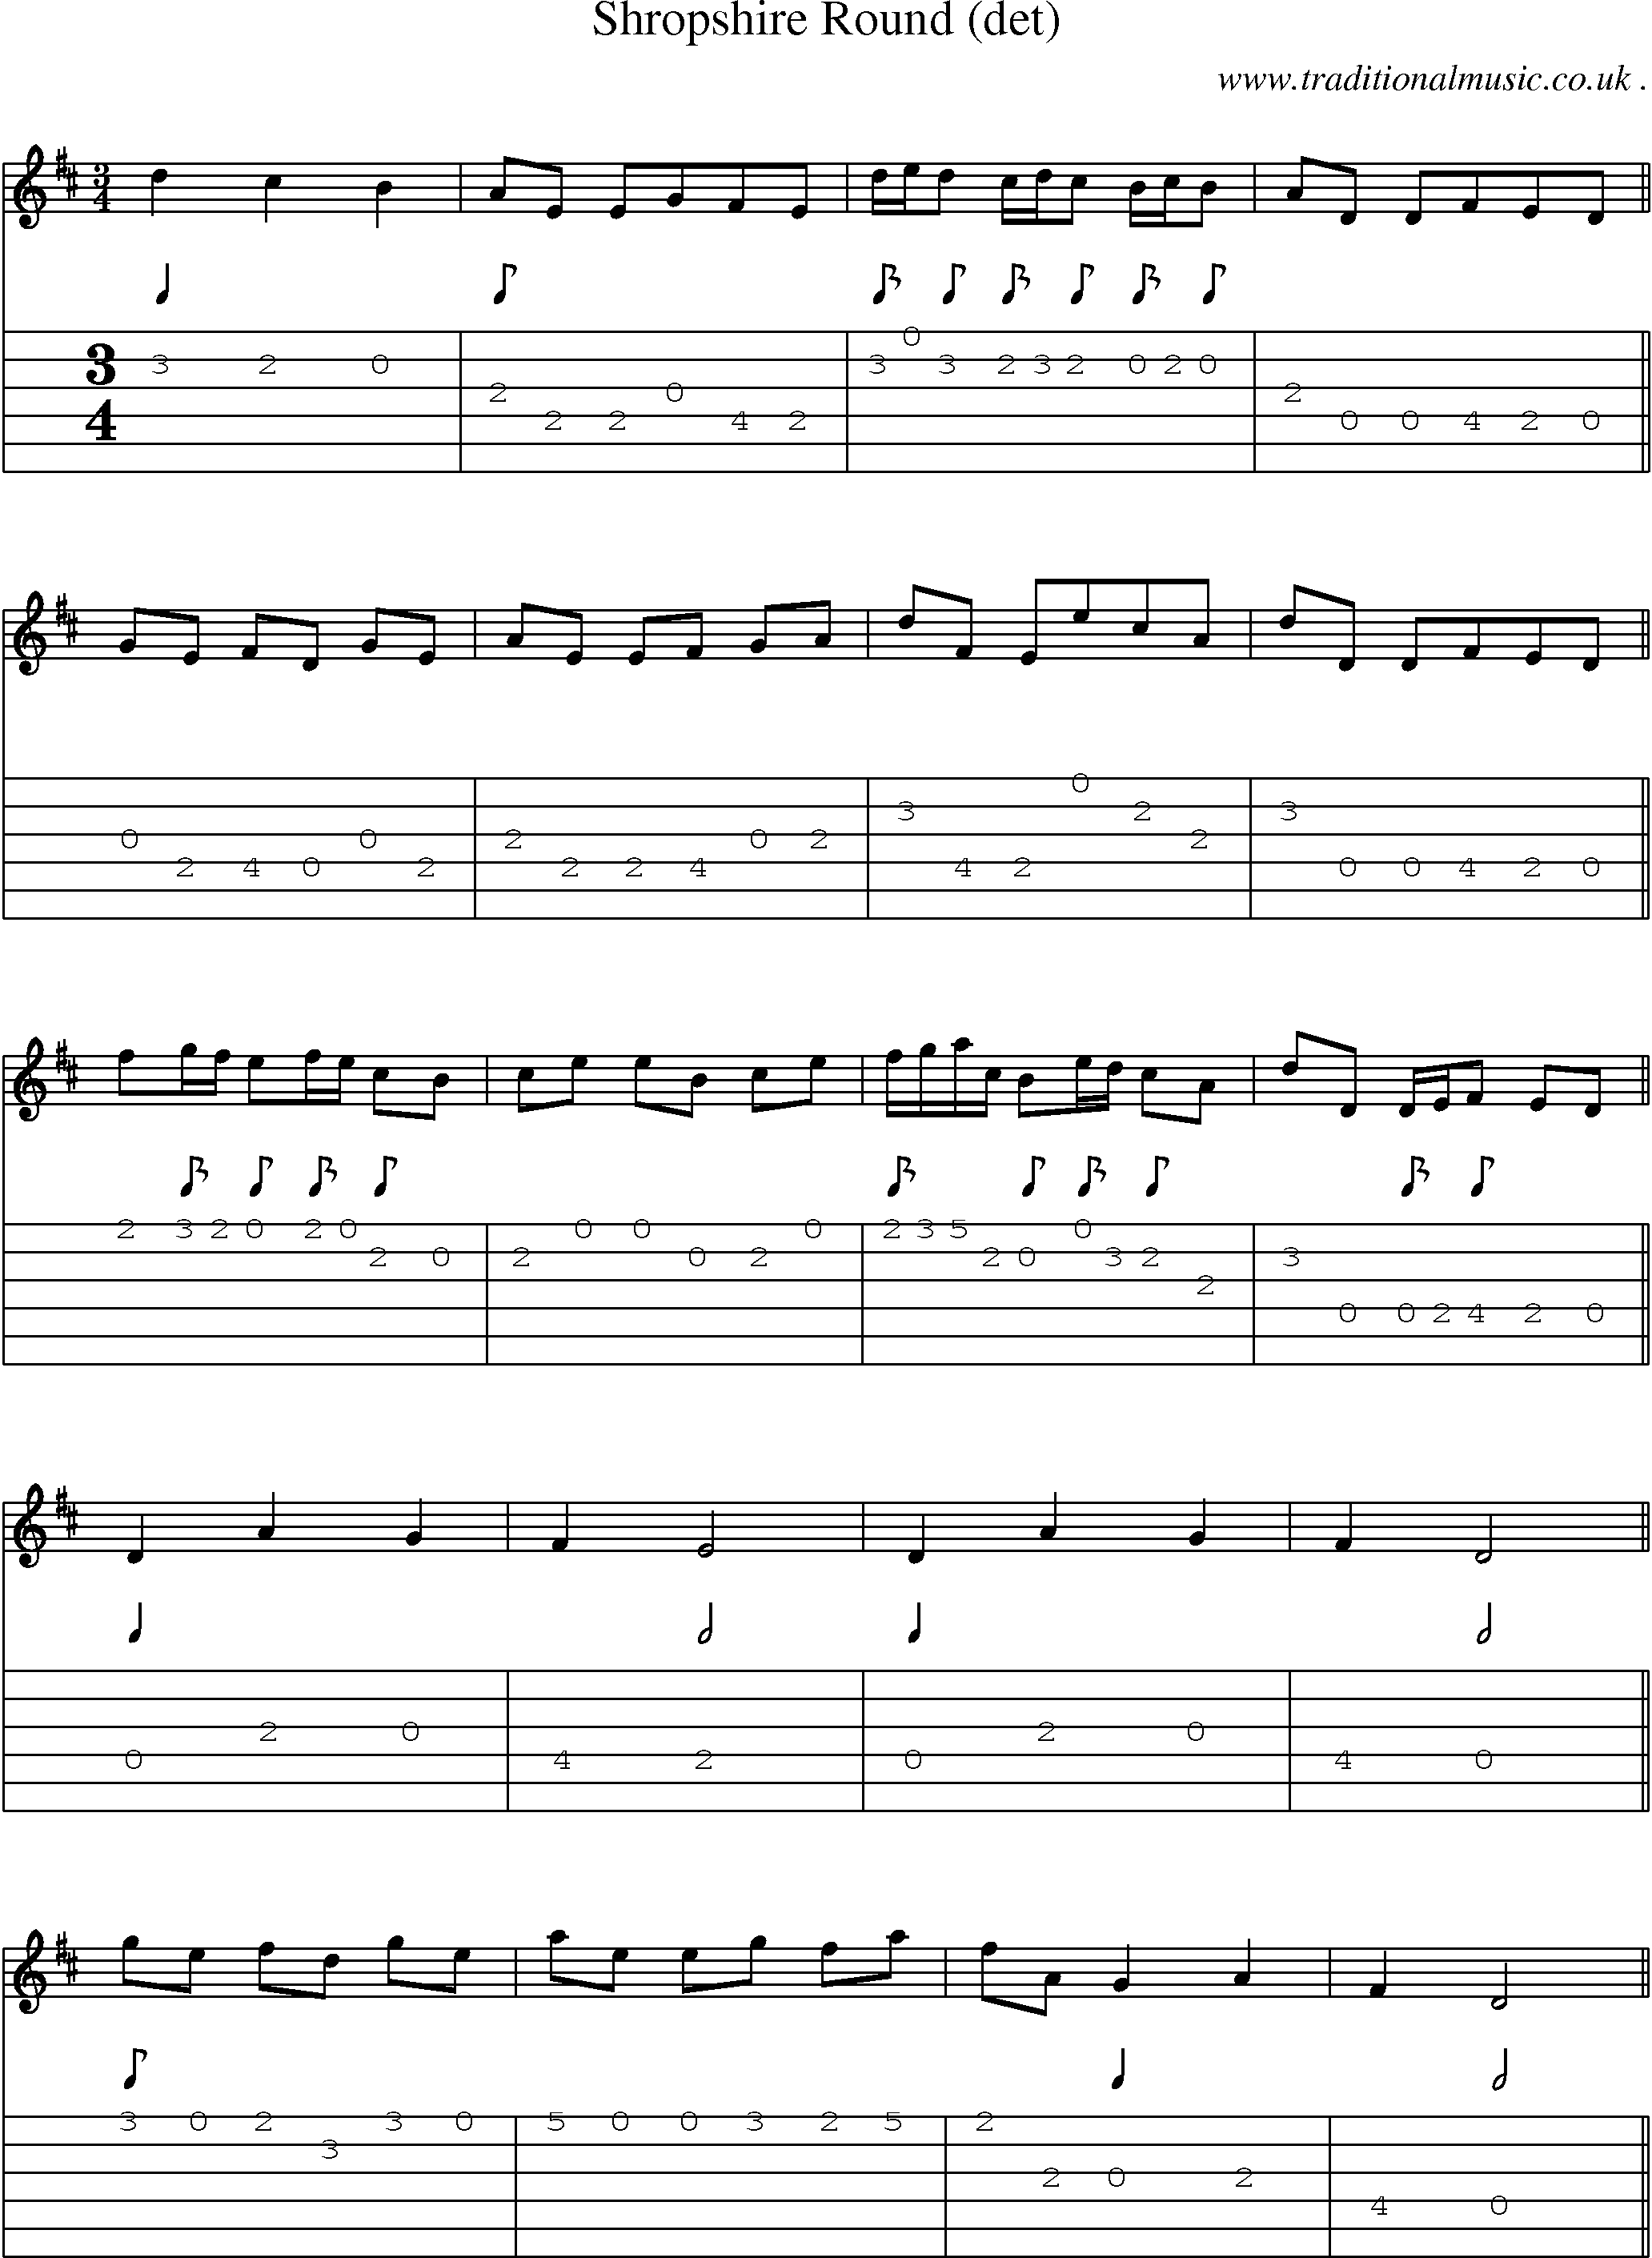 Sheet-Music and Guitar Tabs for Shropshire Round (det)